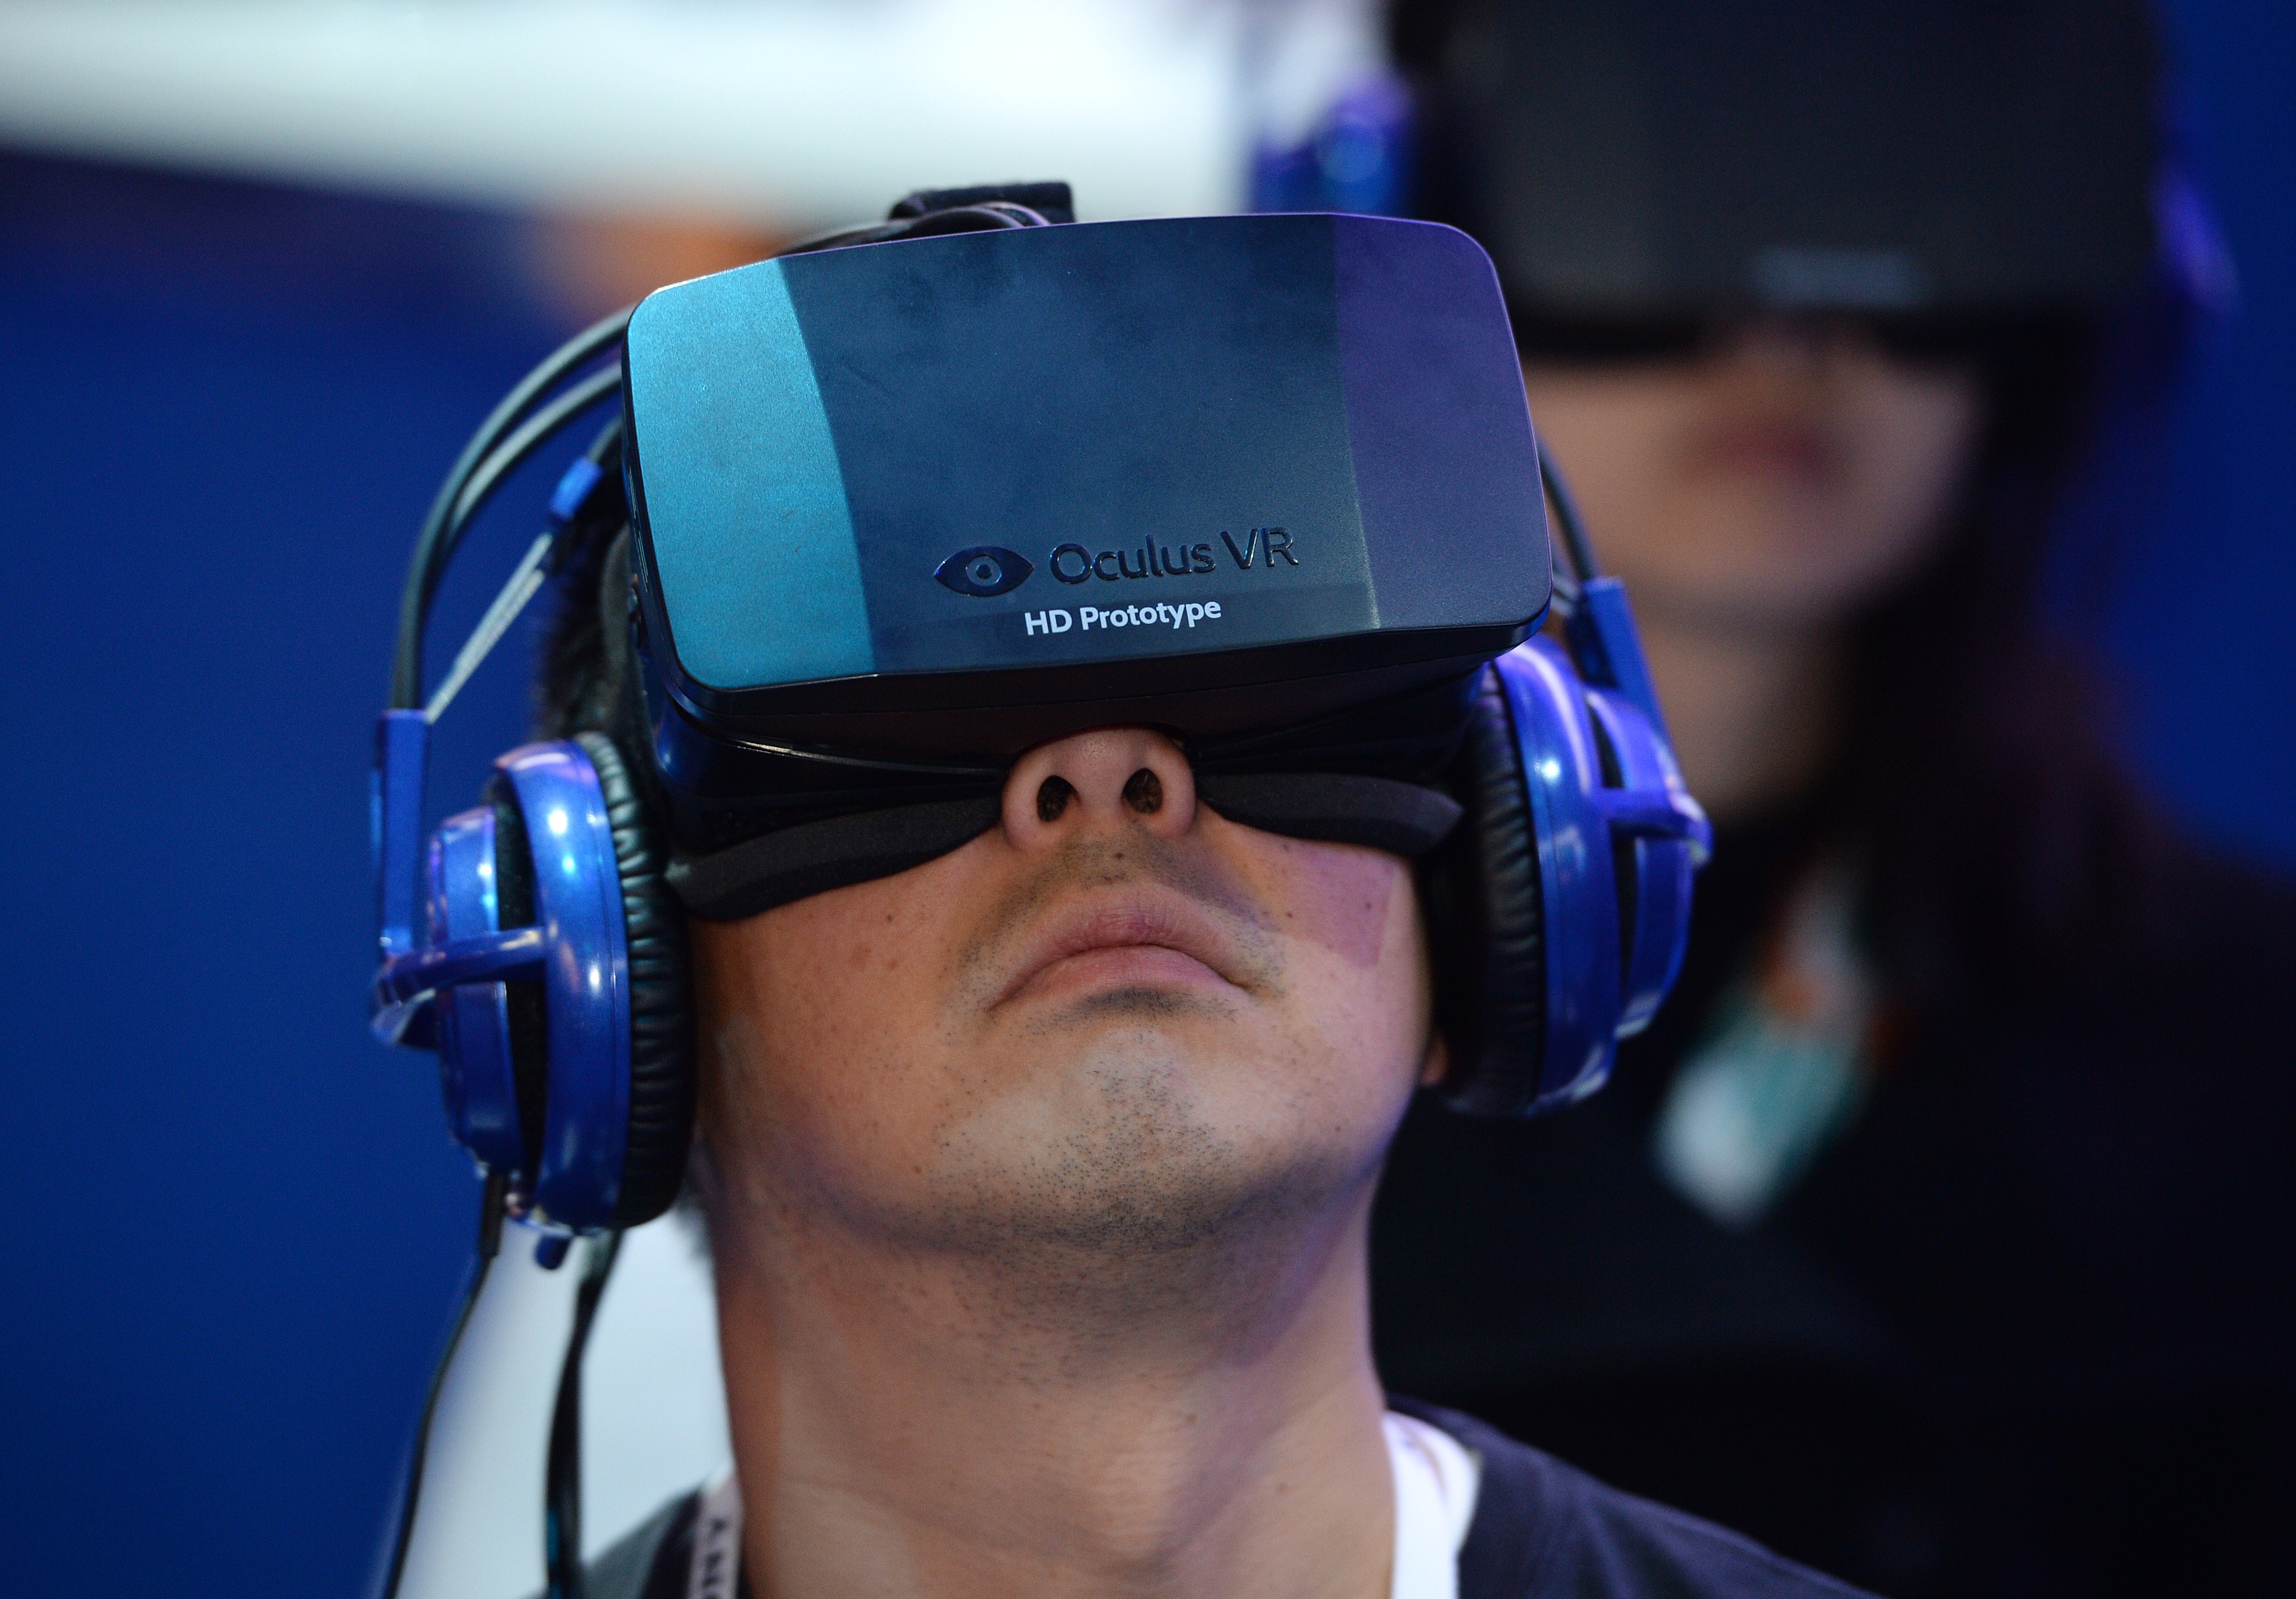 An attendee wears an Oculus Rift HD virtual reality head-mounted display at he plays EVE: Valkyrie, a multiplayer virtual reality dogfighting shooter game, at the Intel booth at the 2014 International CES, January 9, 2014 in Las Vegas, Nevada. (Robyn Beck&mdash;AFP/Getty Images)